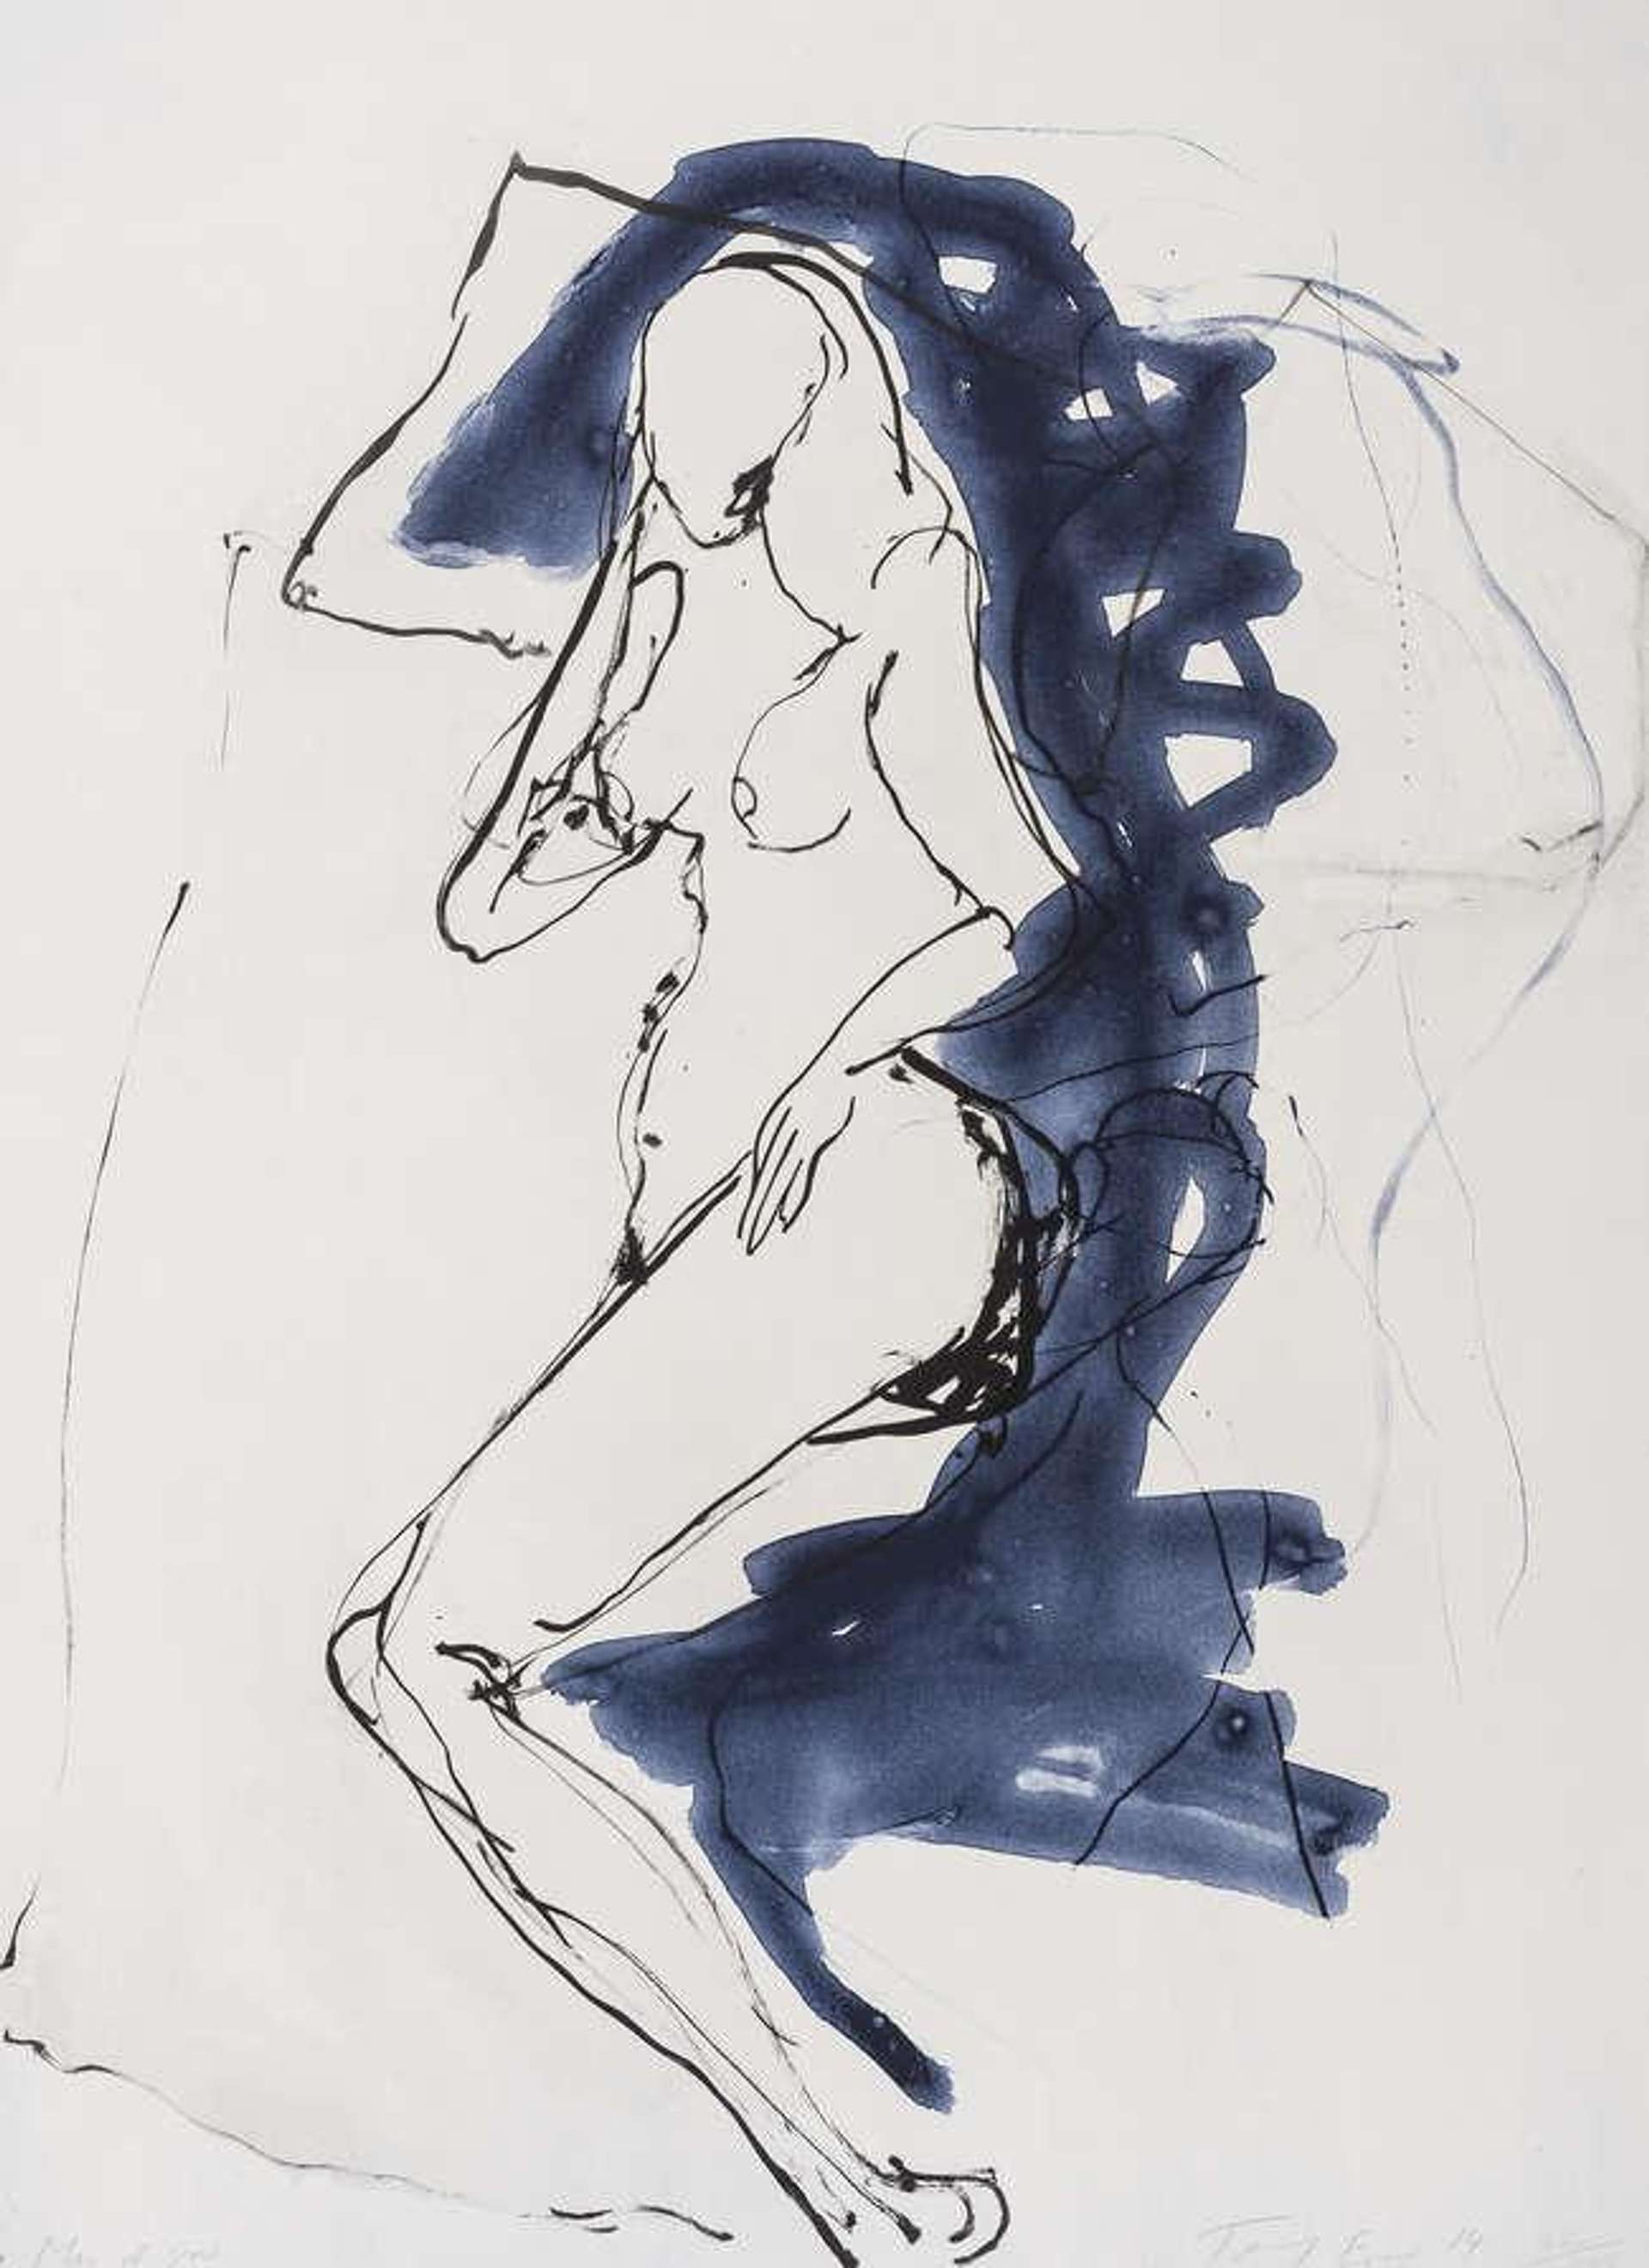 More Of You - Signed Print by Tracey Emin 2014 - MyArtBroker